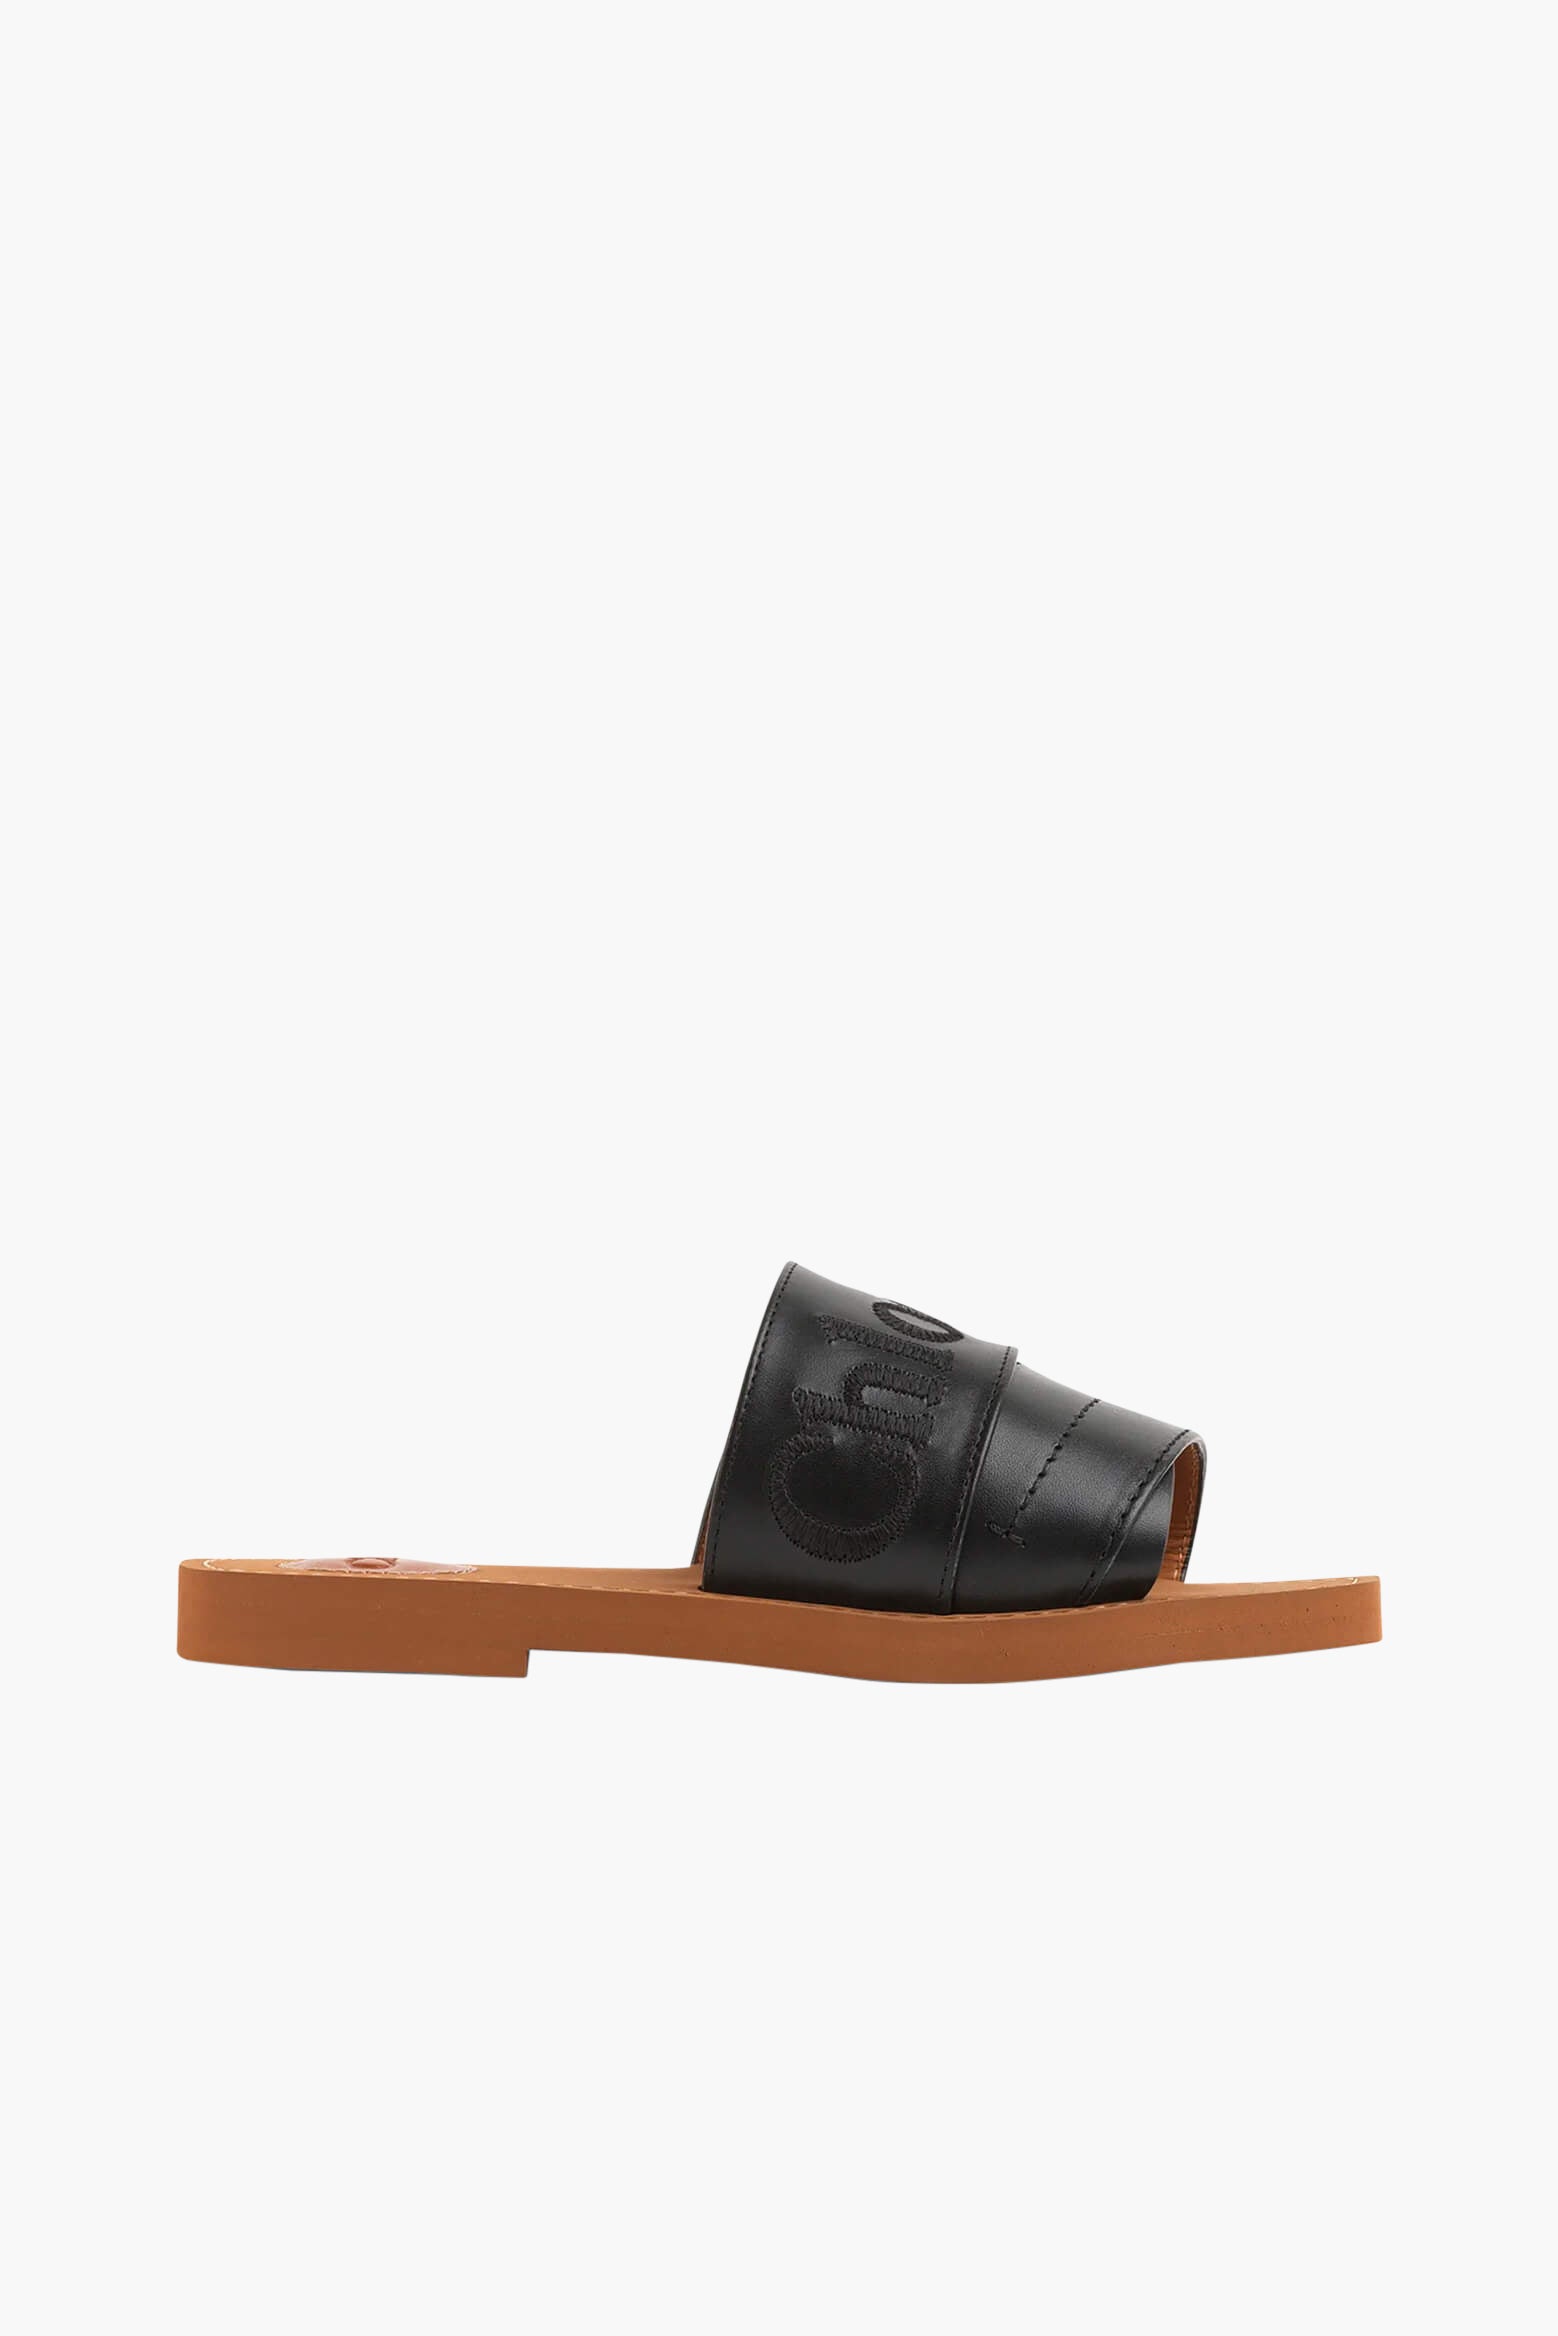 Chloe Woody Leather Slide in Black from The New Trend